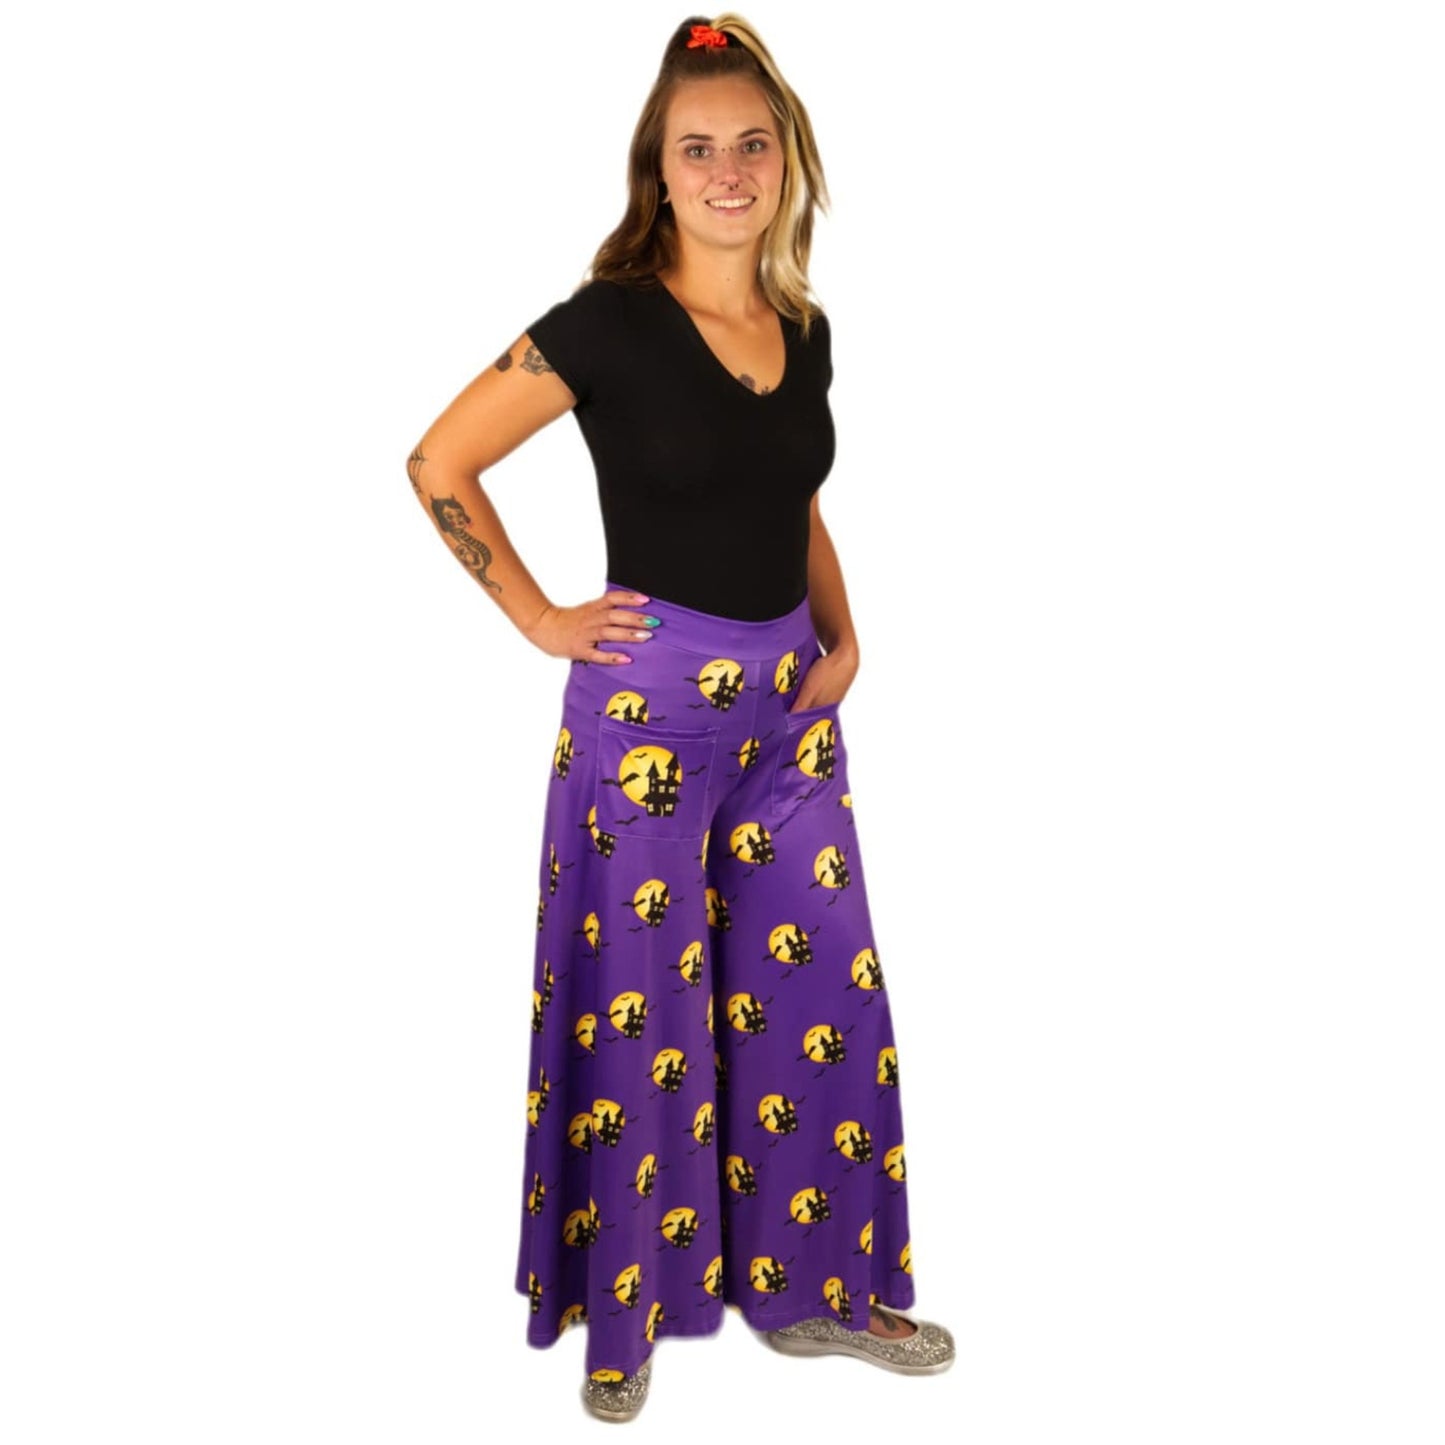 Haunted House Wide Leg Pants by RainbowsAndFairies.com.au (Addams Family - Bats - Purple - Pants With Pockets - Vintage Inspired - Flares - Halloween) - SKU: CL_WIDEL_HAUNT_ORG - Pic-05